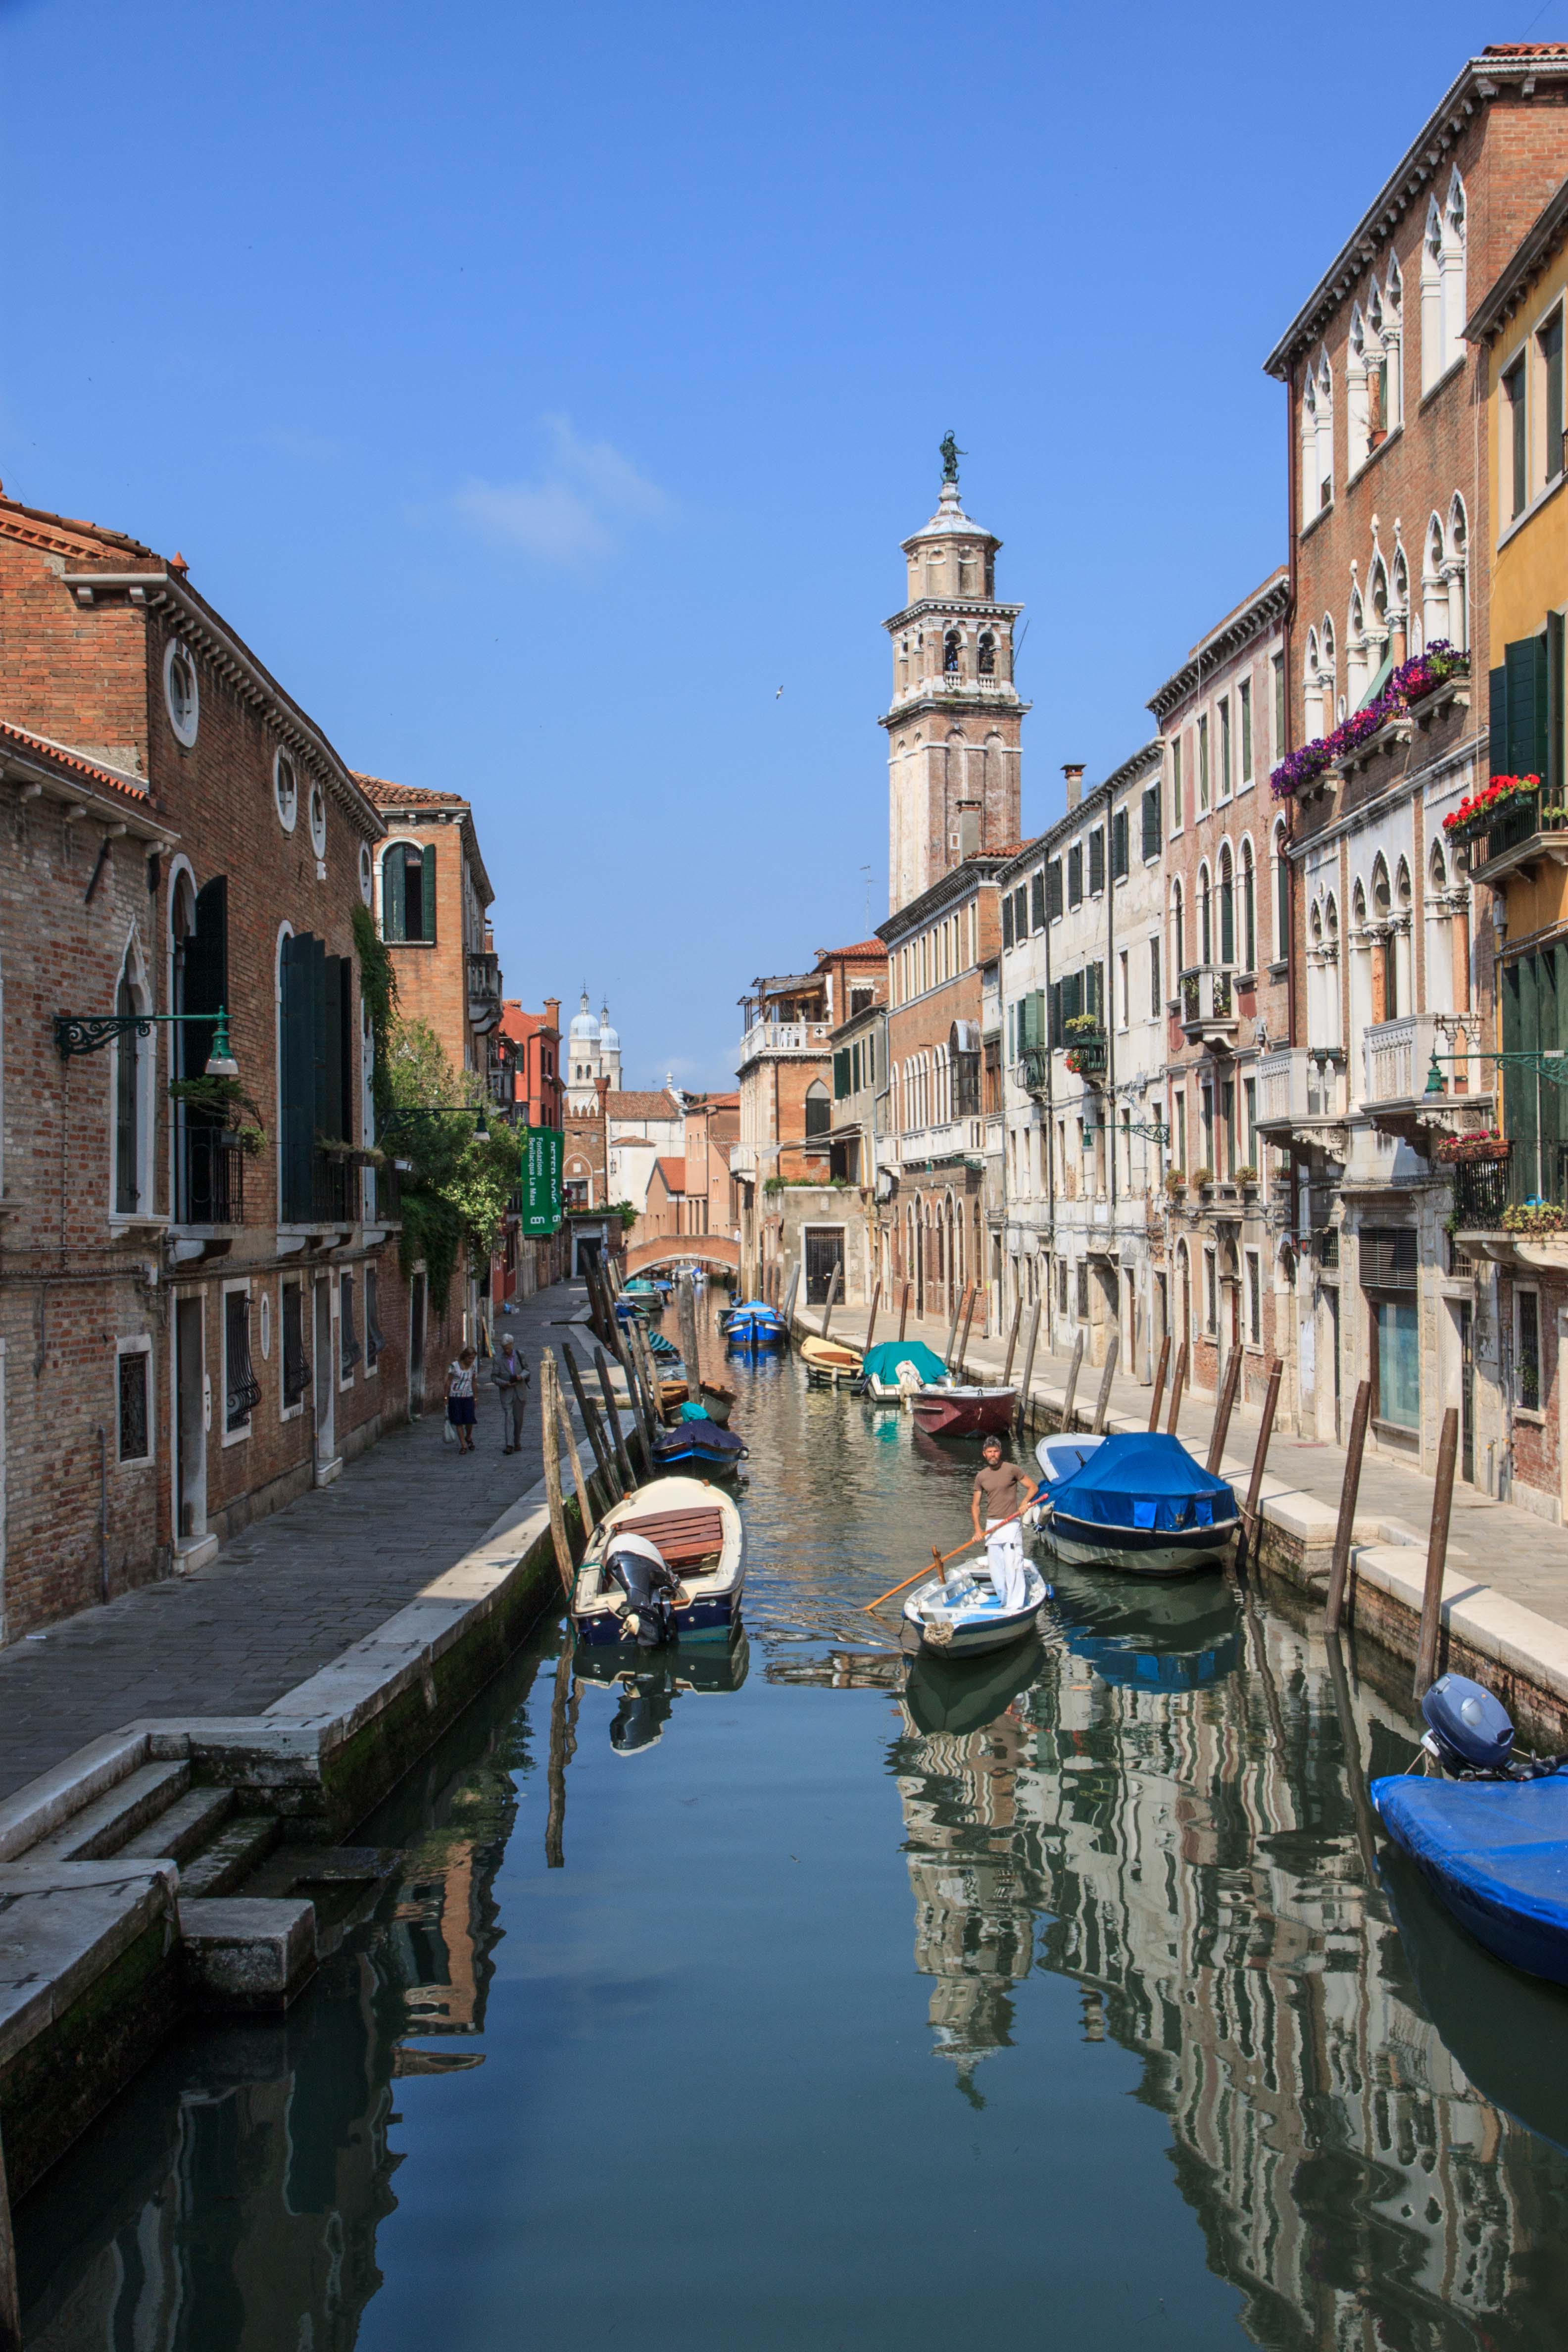 Typical Venice canal scene